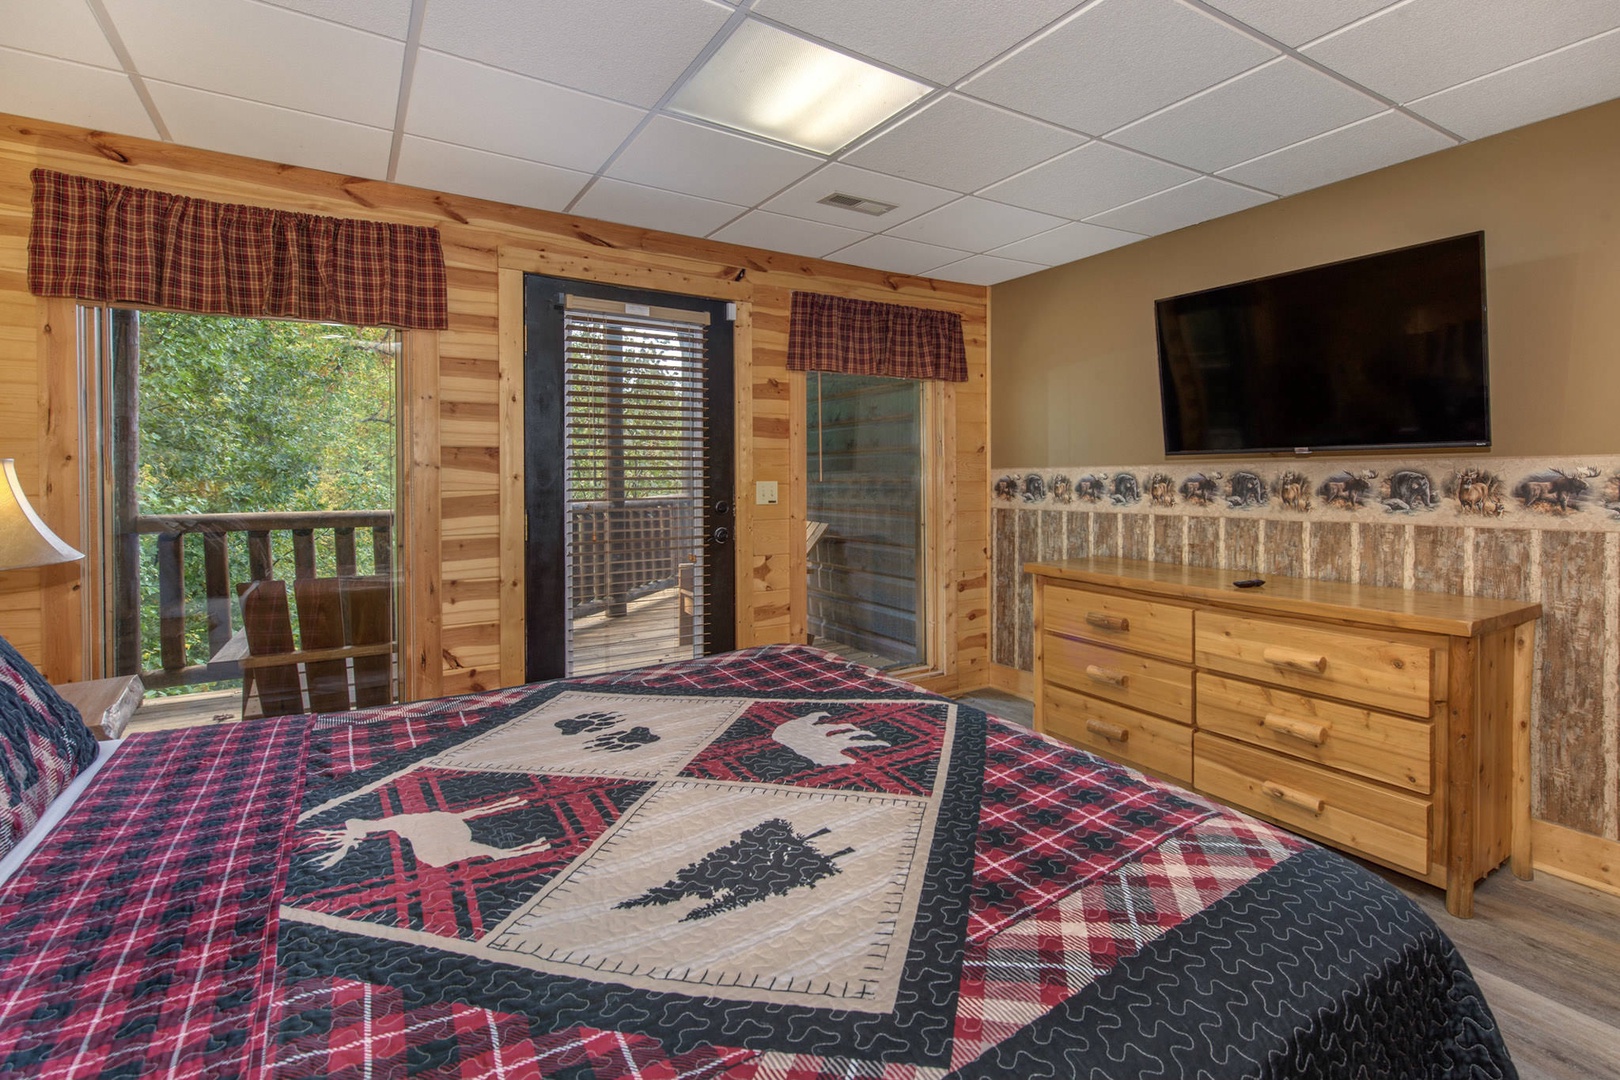 Bedroom 3 with King bed, Smart TV, deck access, and private en-suite